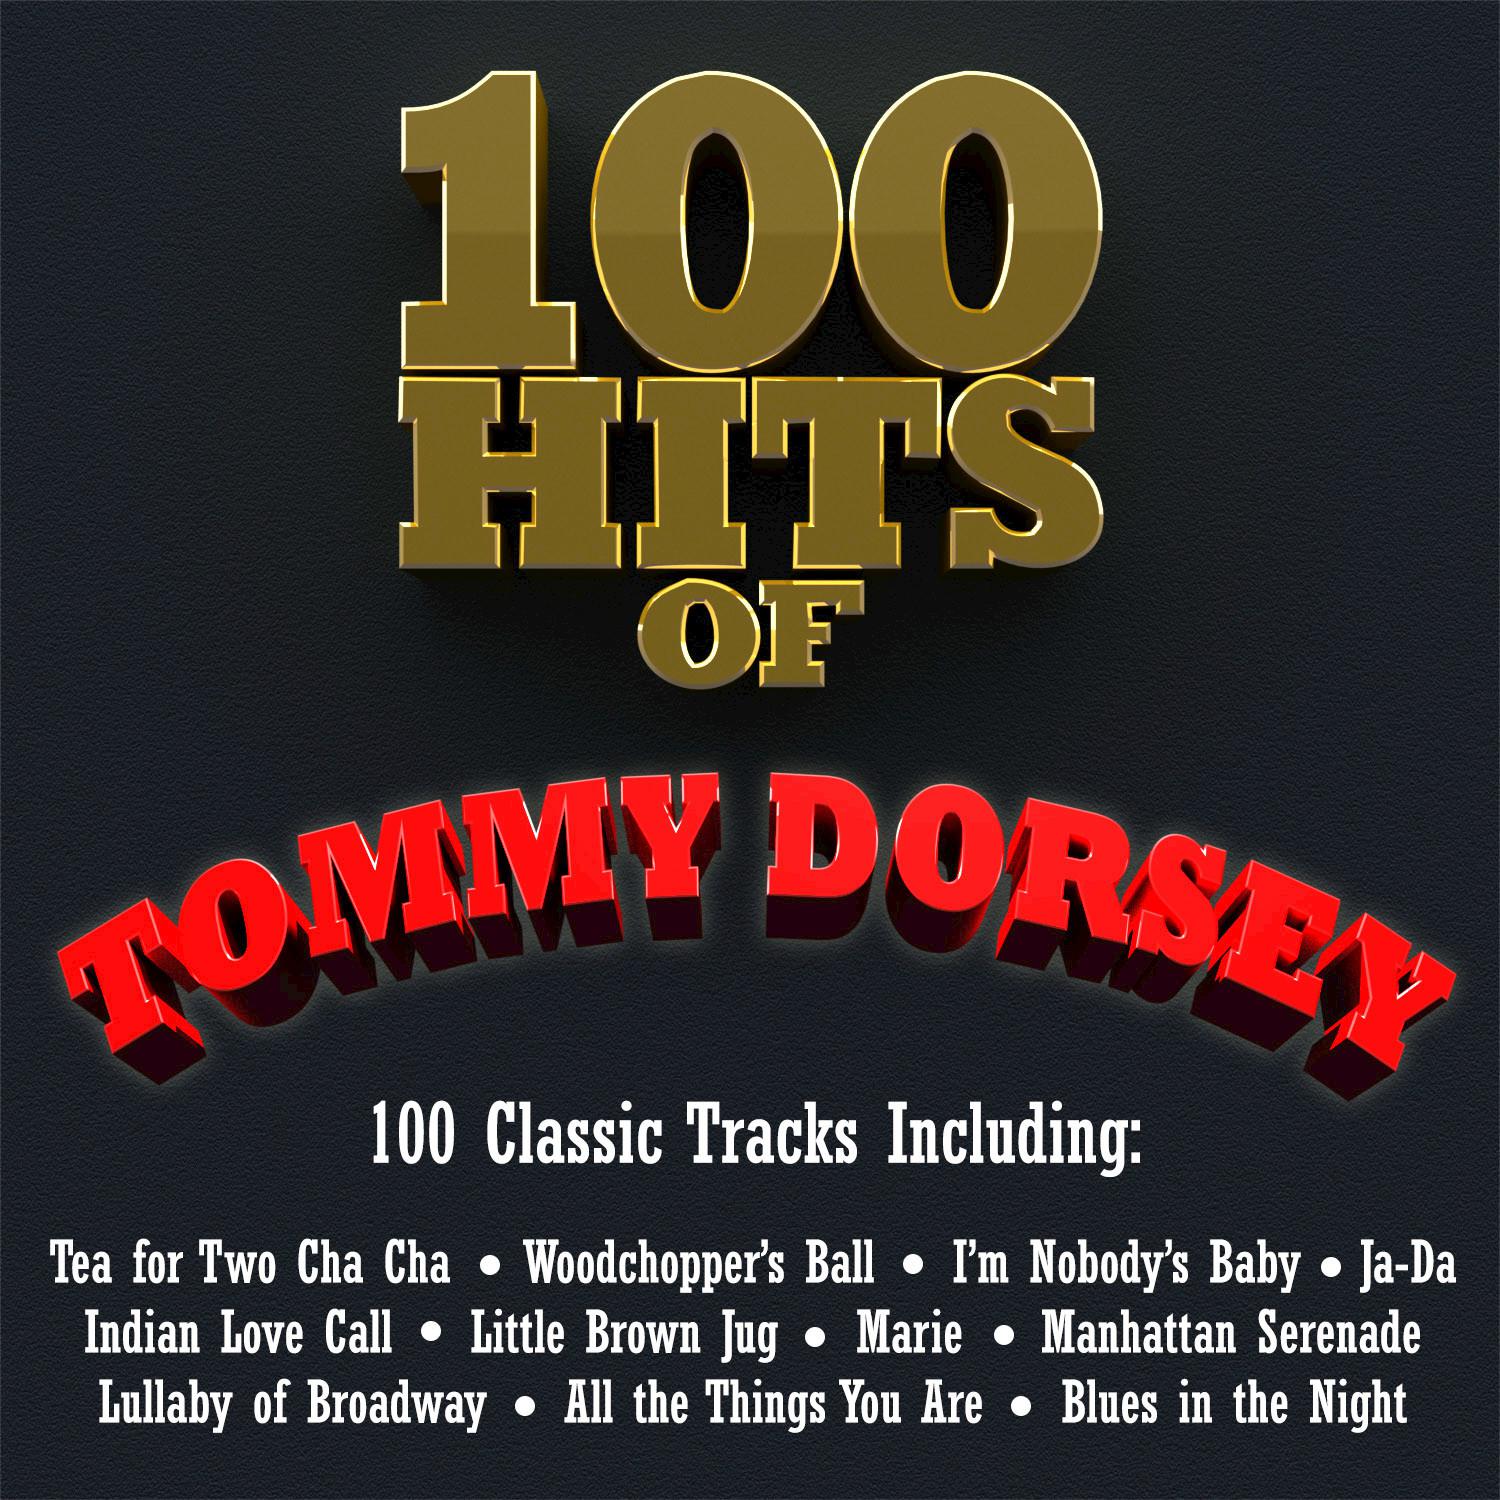 100 Hits of Tommy Dorsey